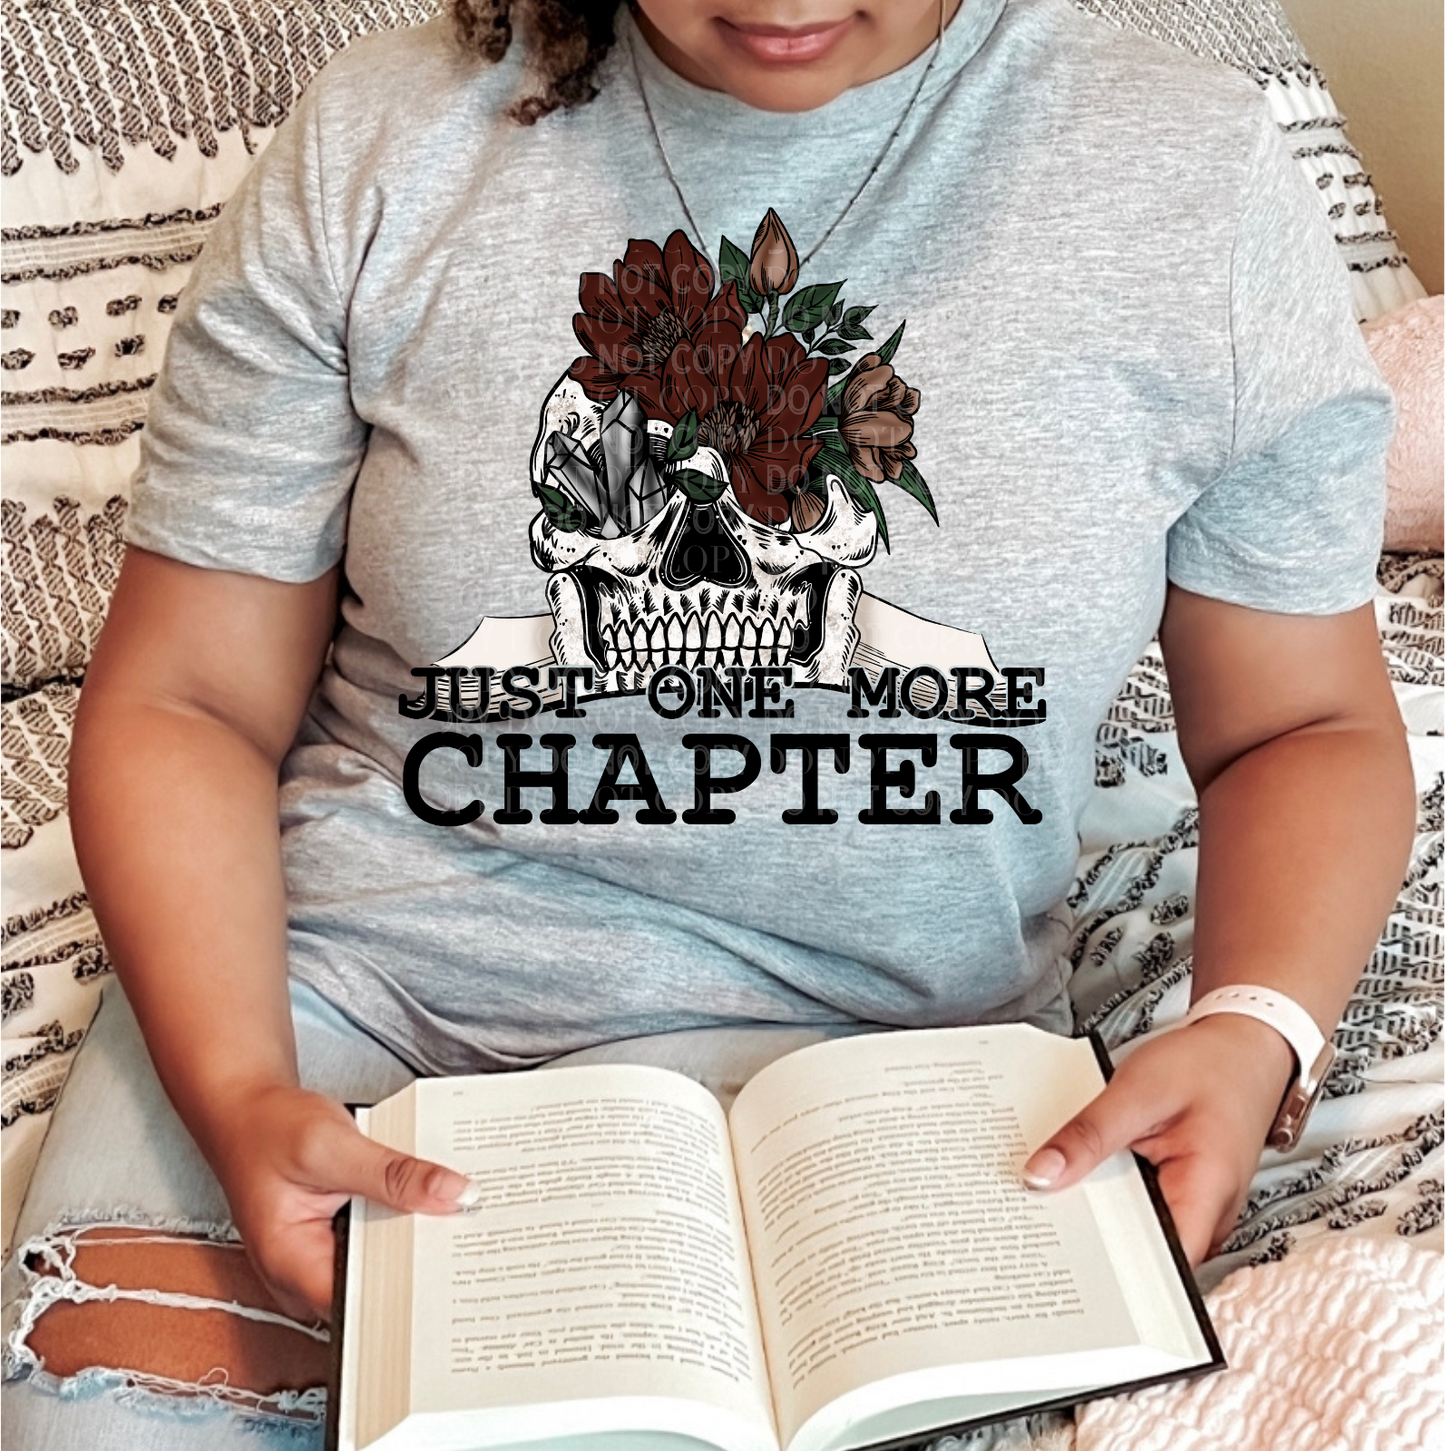 Just One More Chapter - Tee